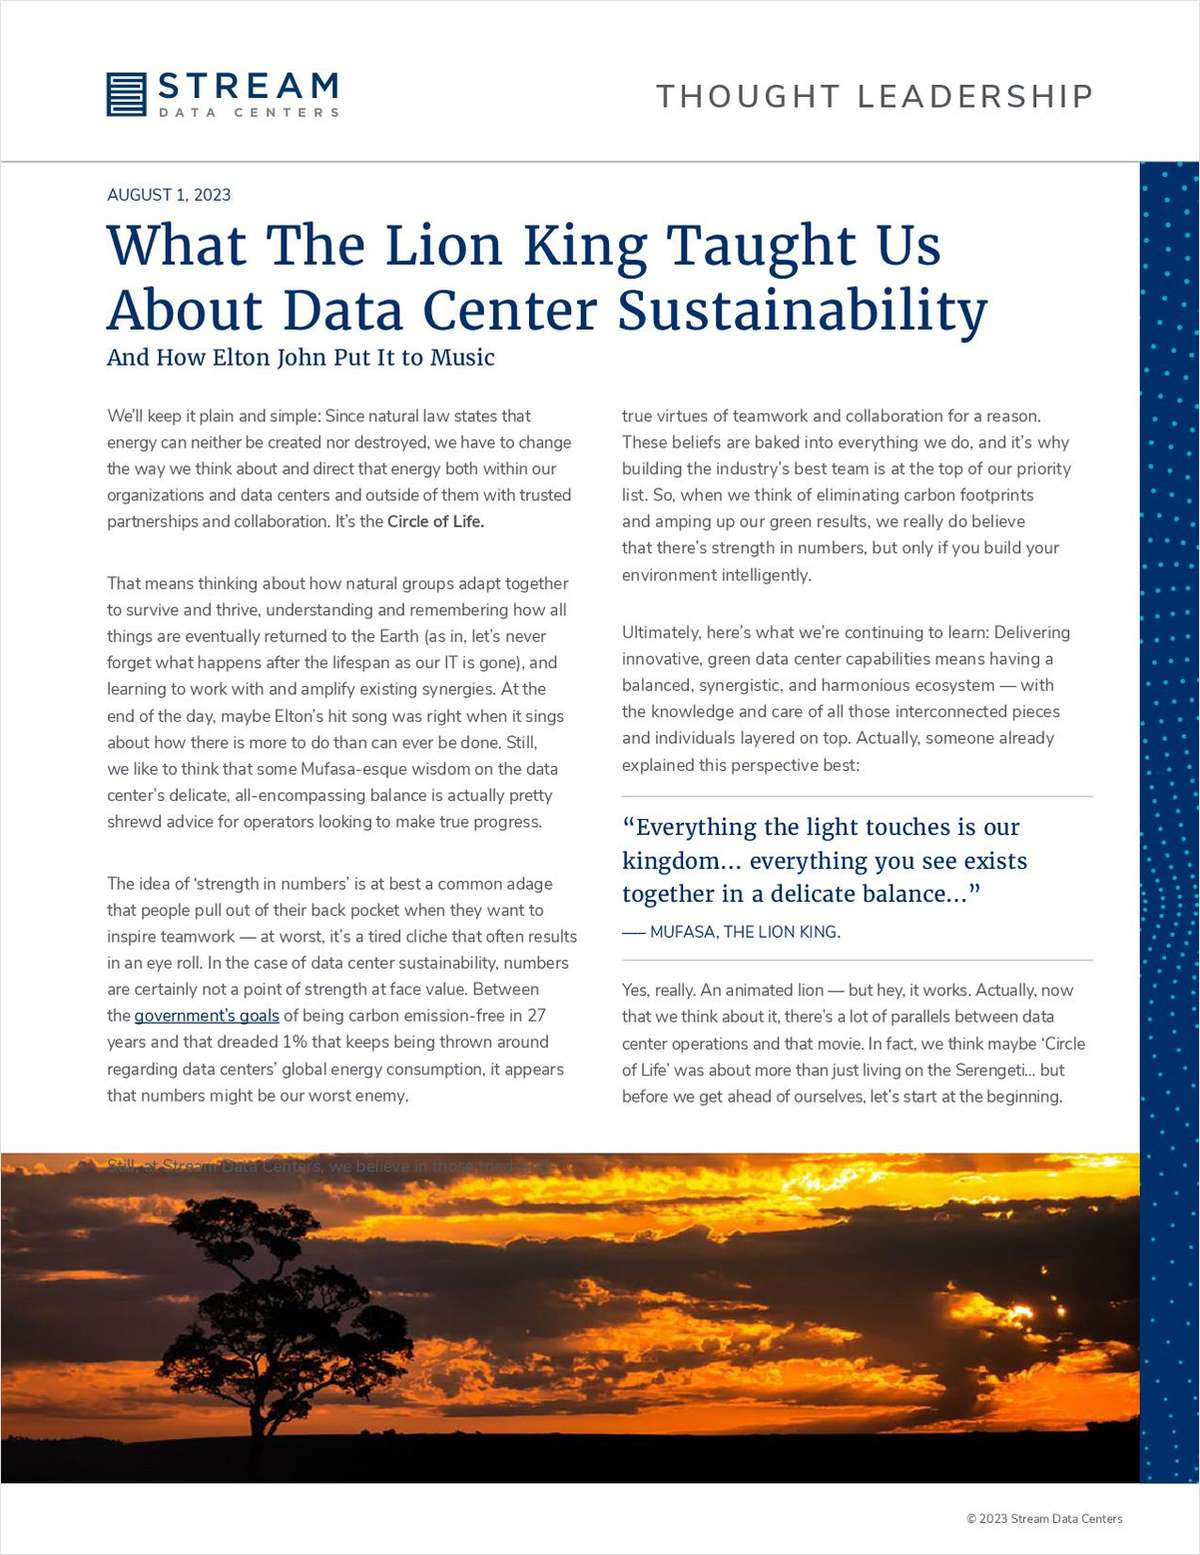 What The Lion King Taught Us About Data Center Sustainability